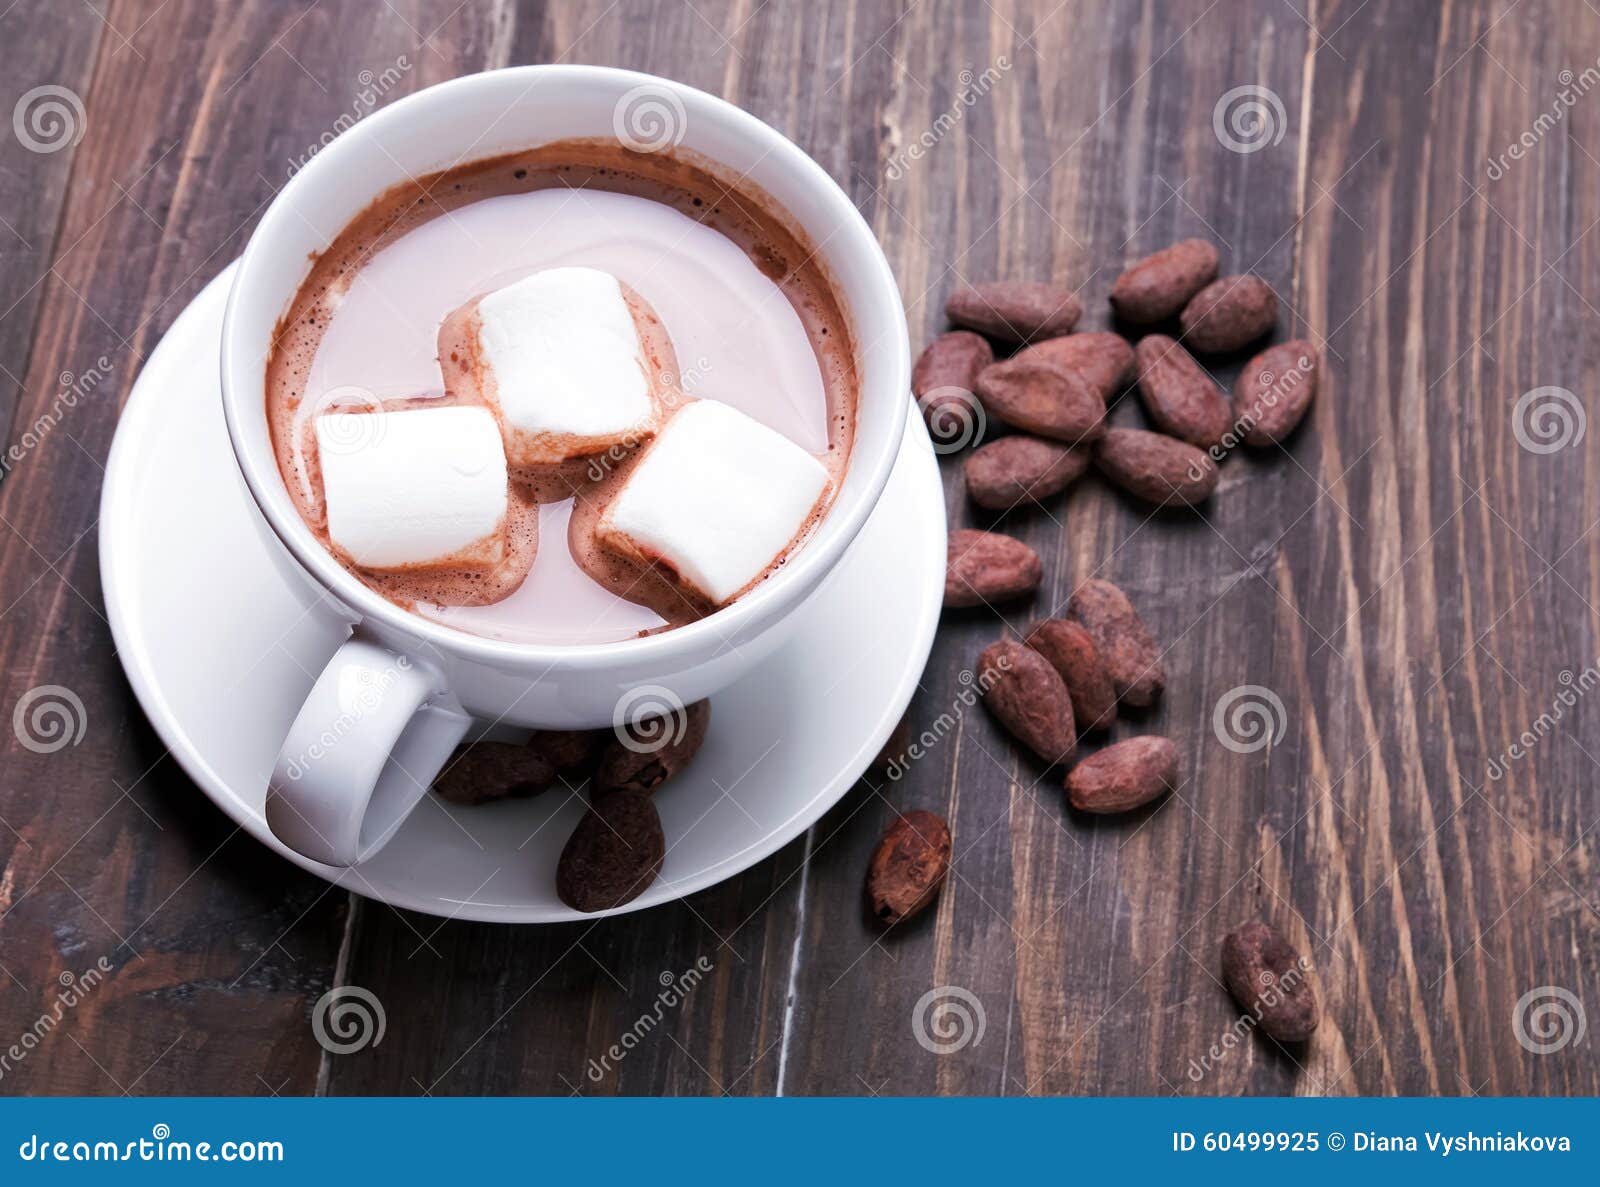 Hot Chocolate with Marshmallows and Cocoa Beans Stock Image - Image of ...